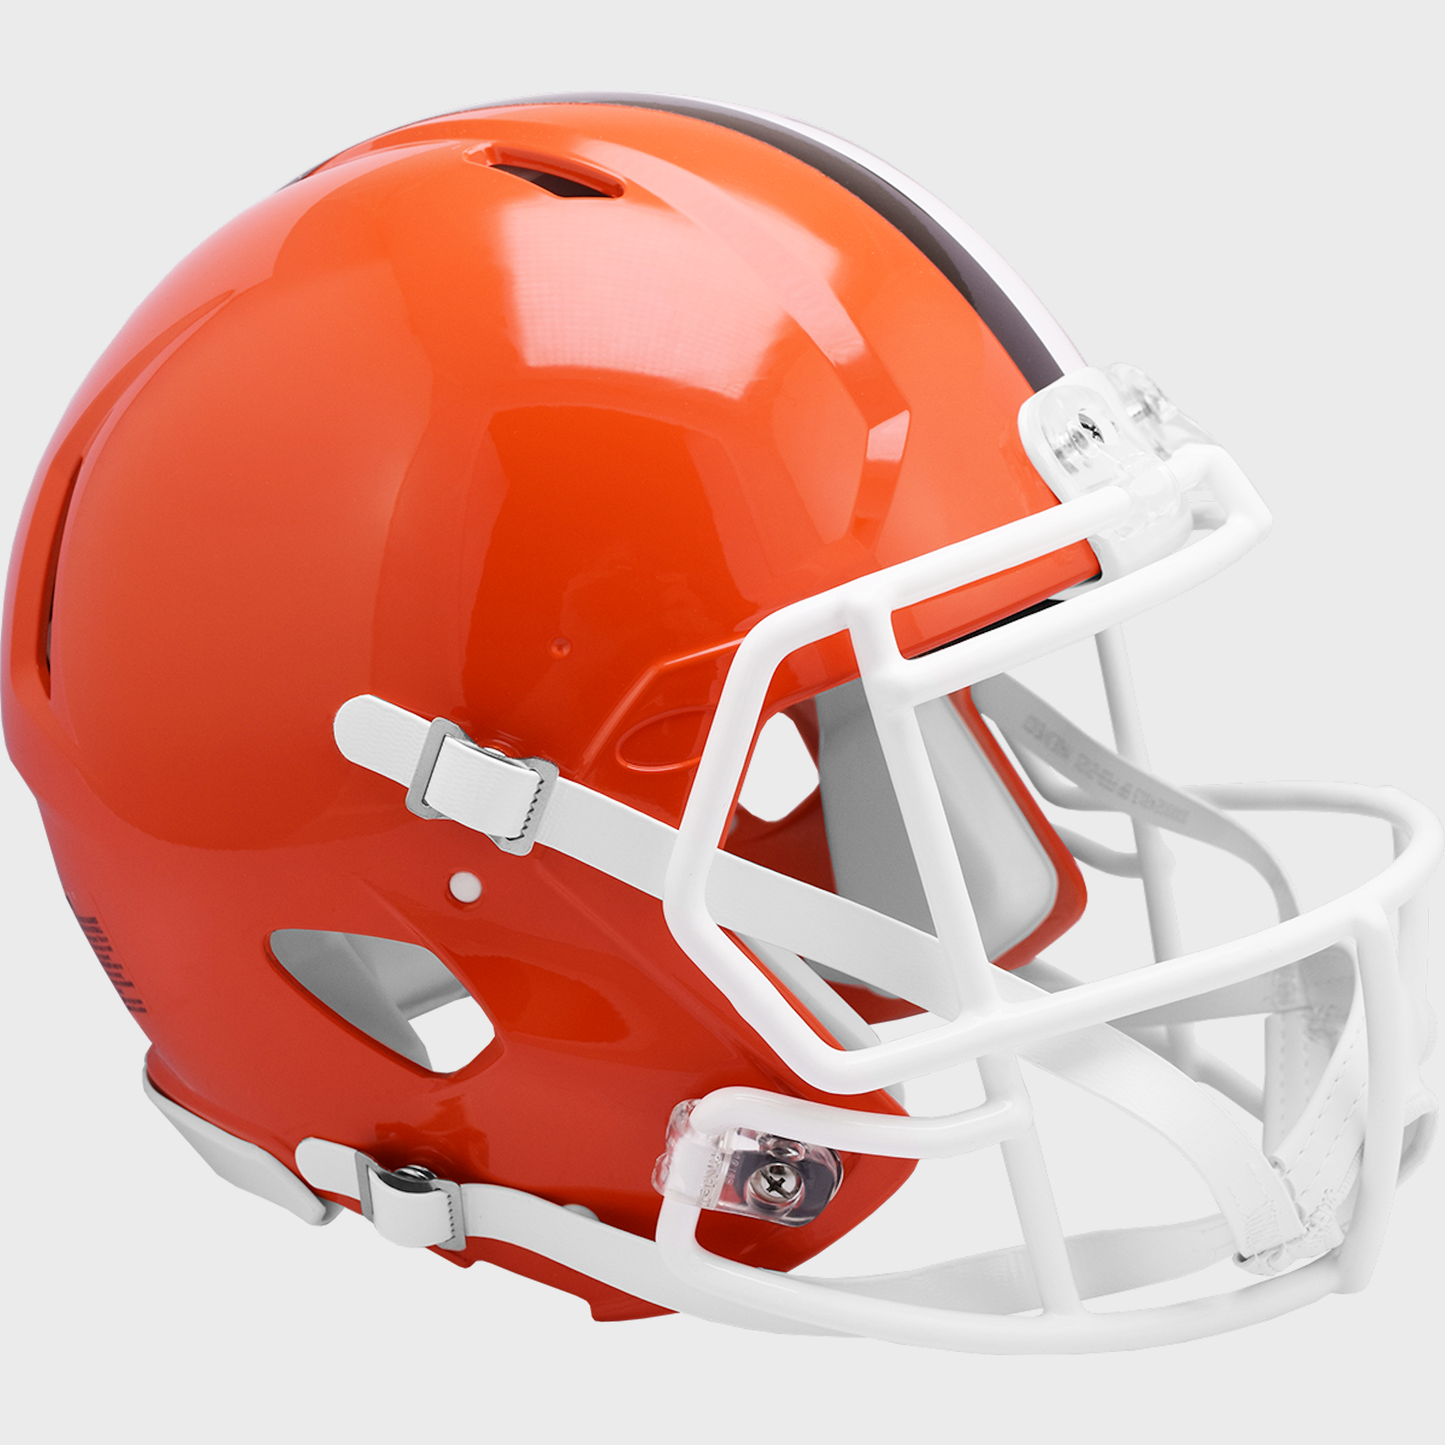 Cleveland Browns authentic full size throwback helmet